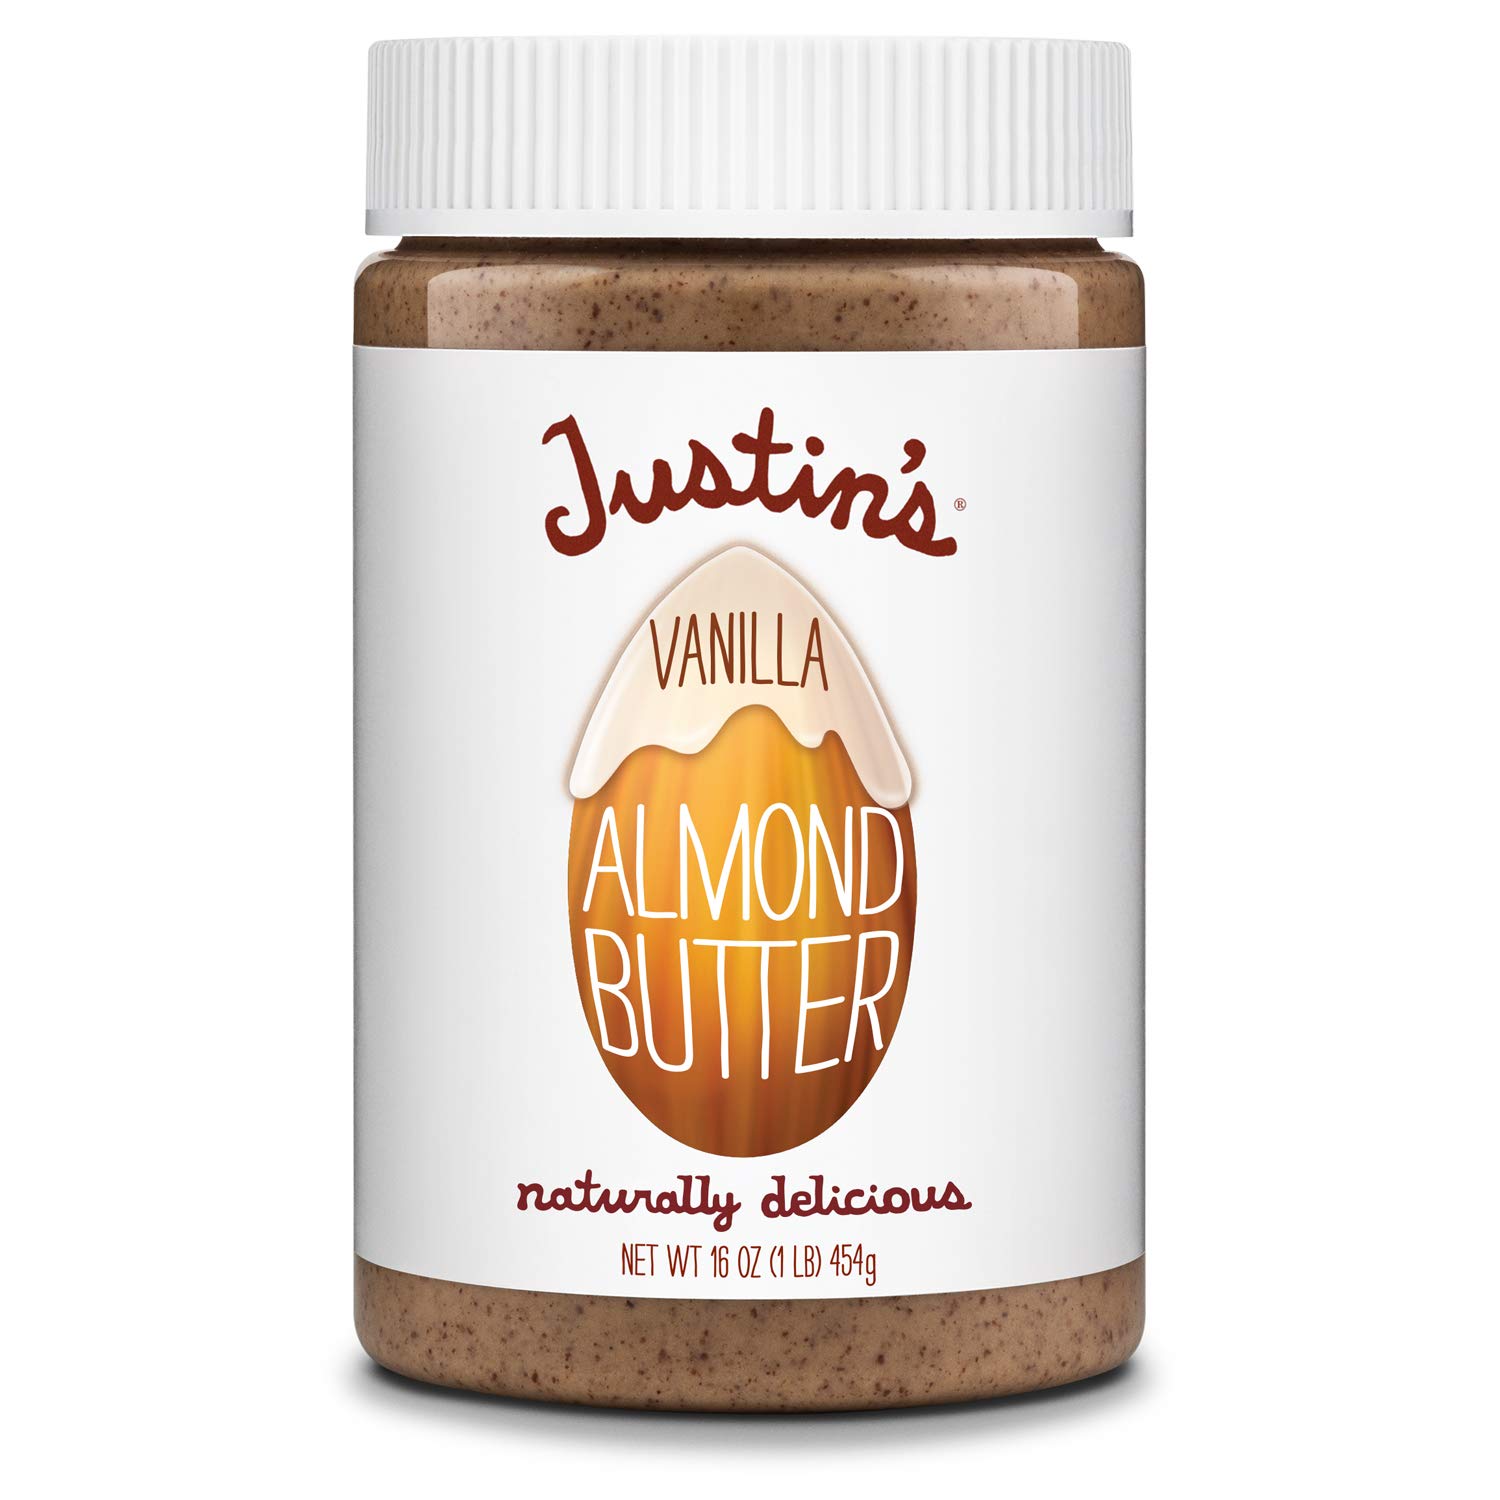 16-Oz Justin's Vanilla Almond Butter Jar $6.75 w/ S&S + Free Shipping w/ Prime or on $35+